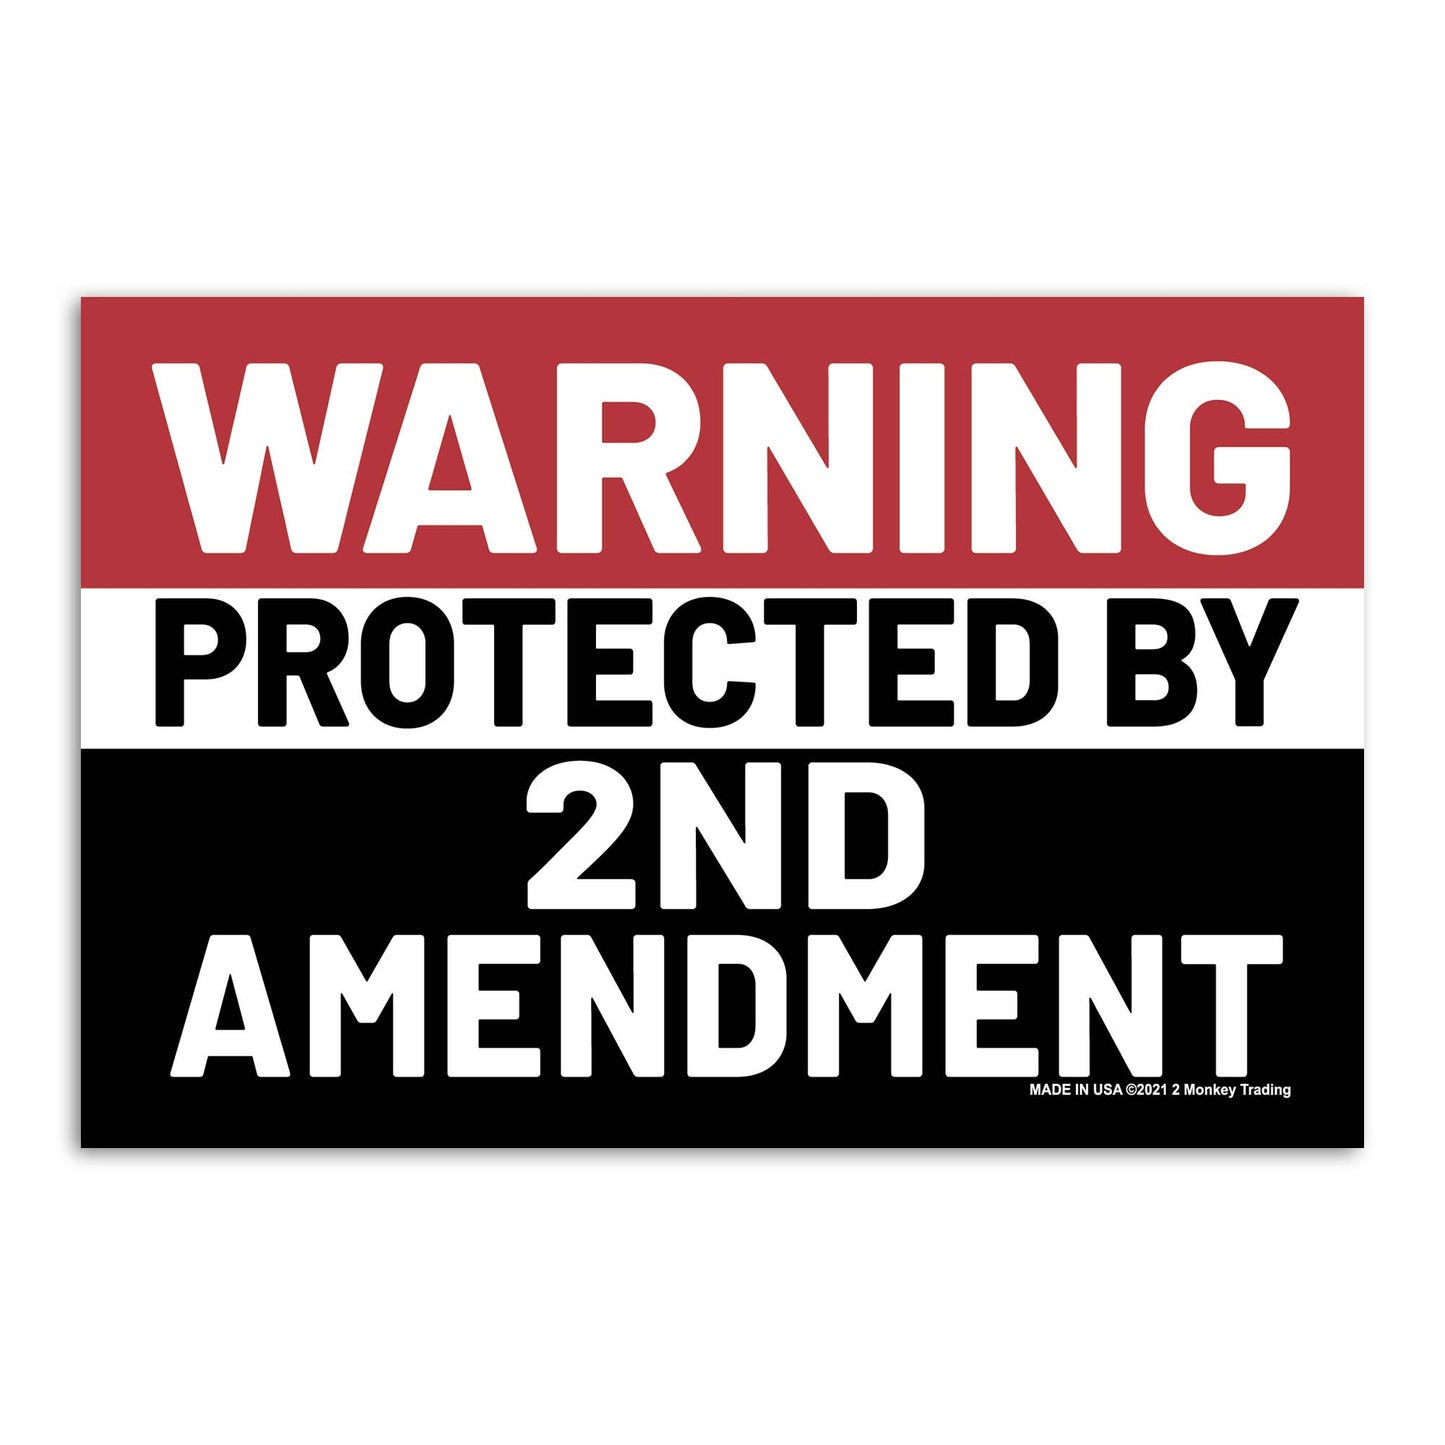 Warning Protected by 2nd Amendment Decal Sticker